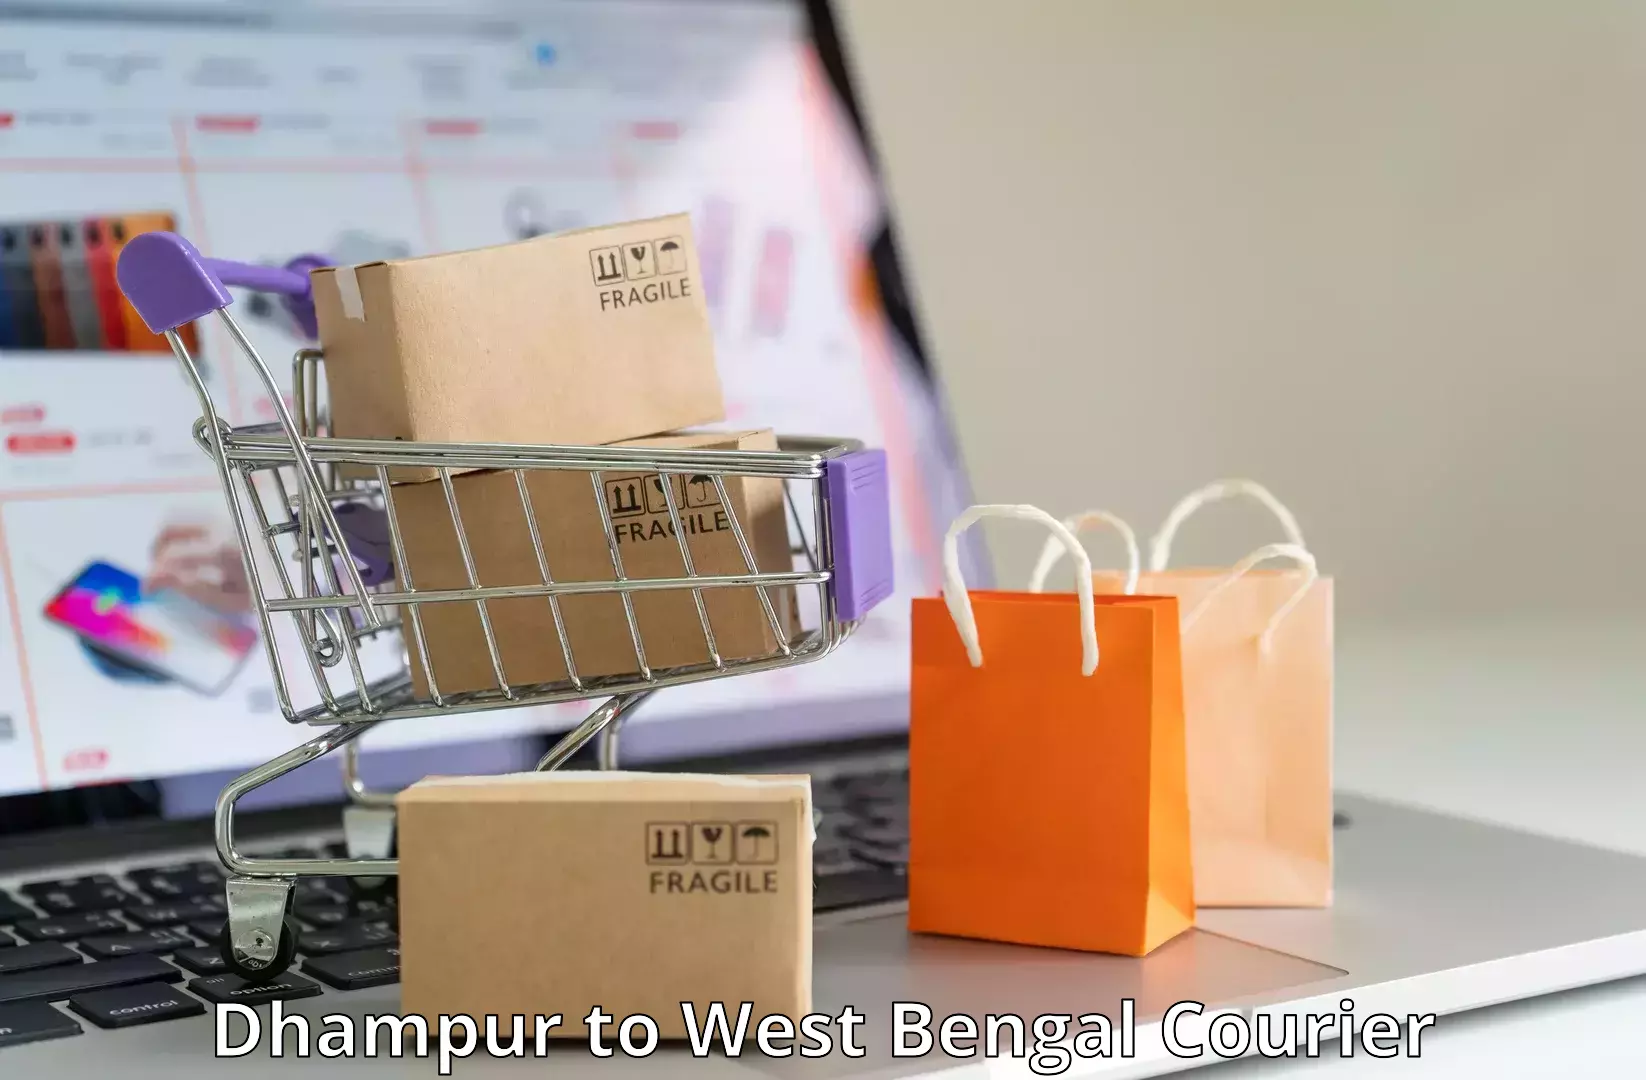 Efficient parcel tracking in Dhampur to Bhatpara